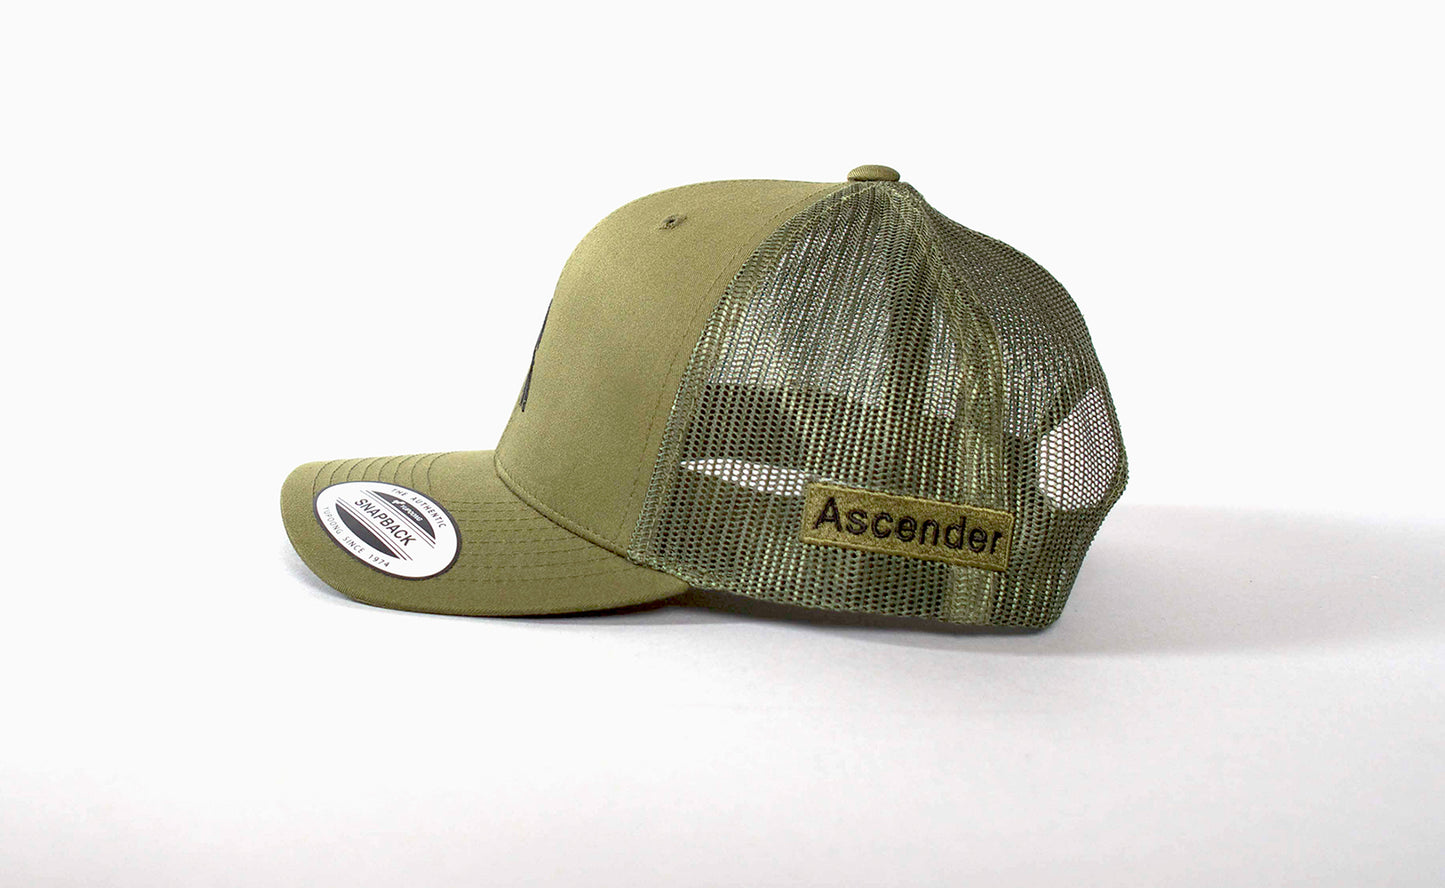 Ascender Cycling Club Snapback Cap Retro Trucker Olive Flexfit Quality Embroidery in Front and Elegant Logo Embroidery on Side